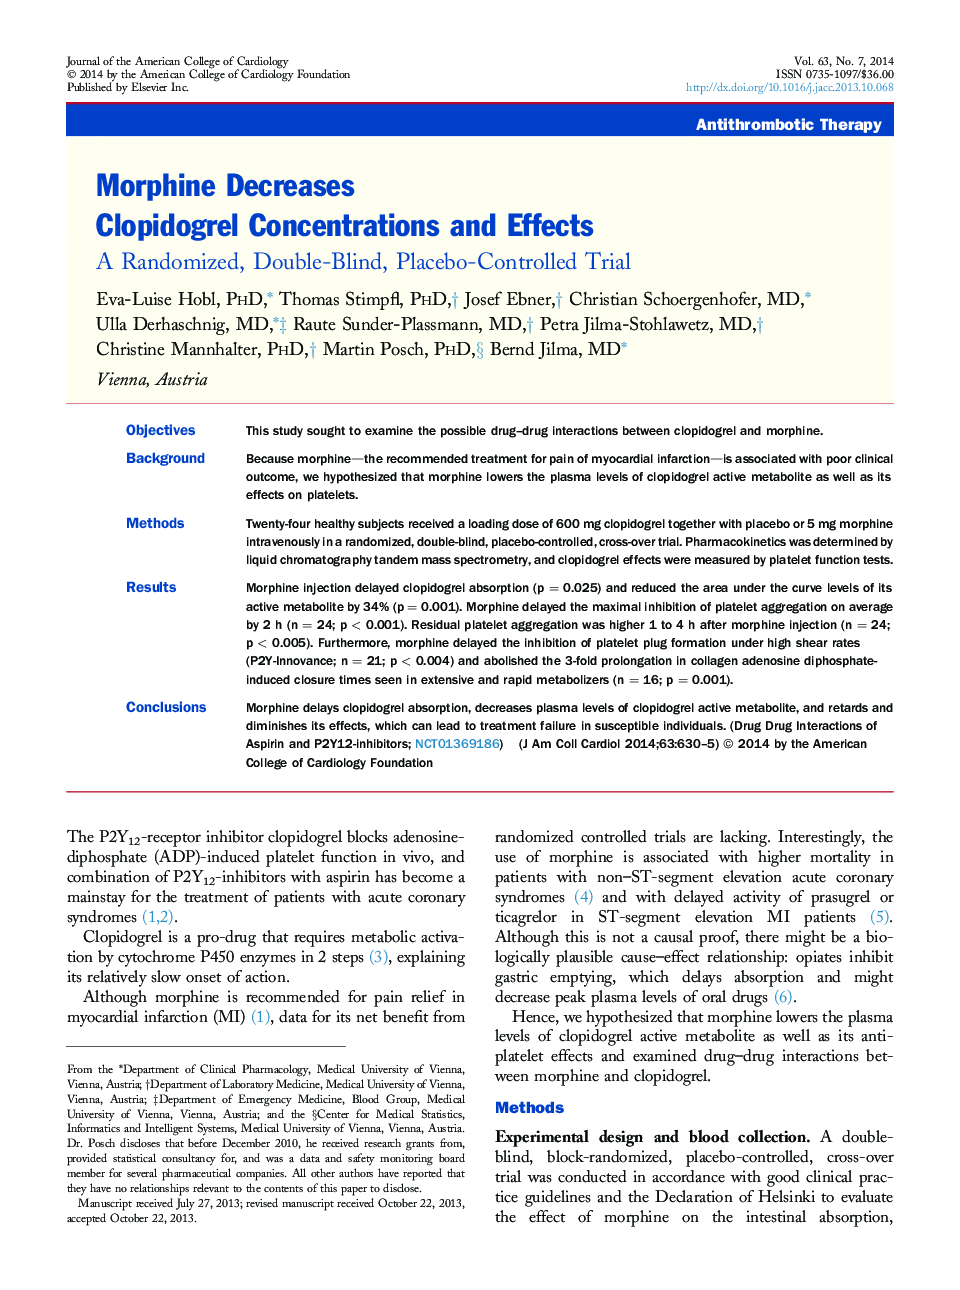 Morphine Decreases Clopidogrel Concentrations and Effects : A Randomized, Double-Blind, Placebo-Controlled Trial